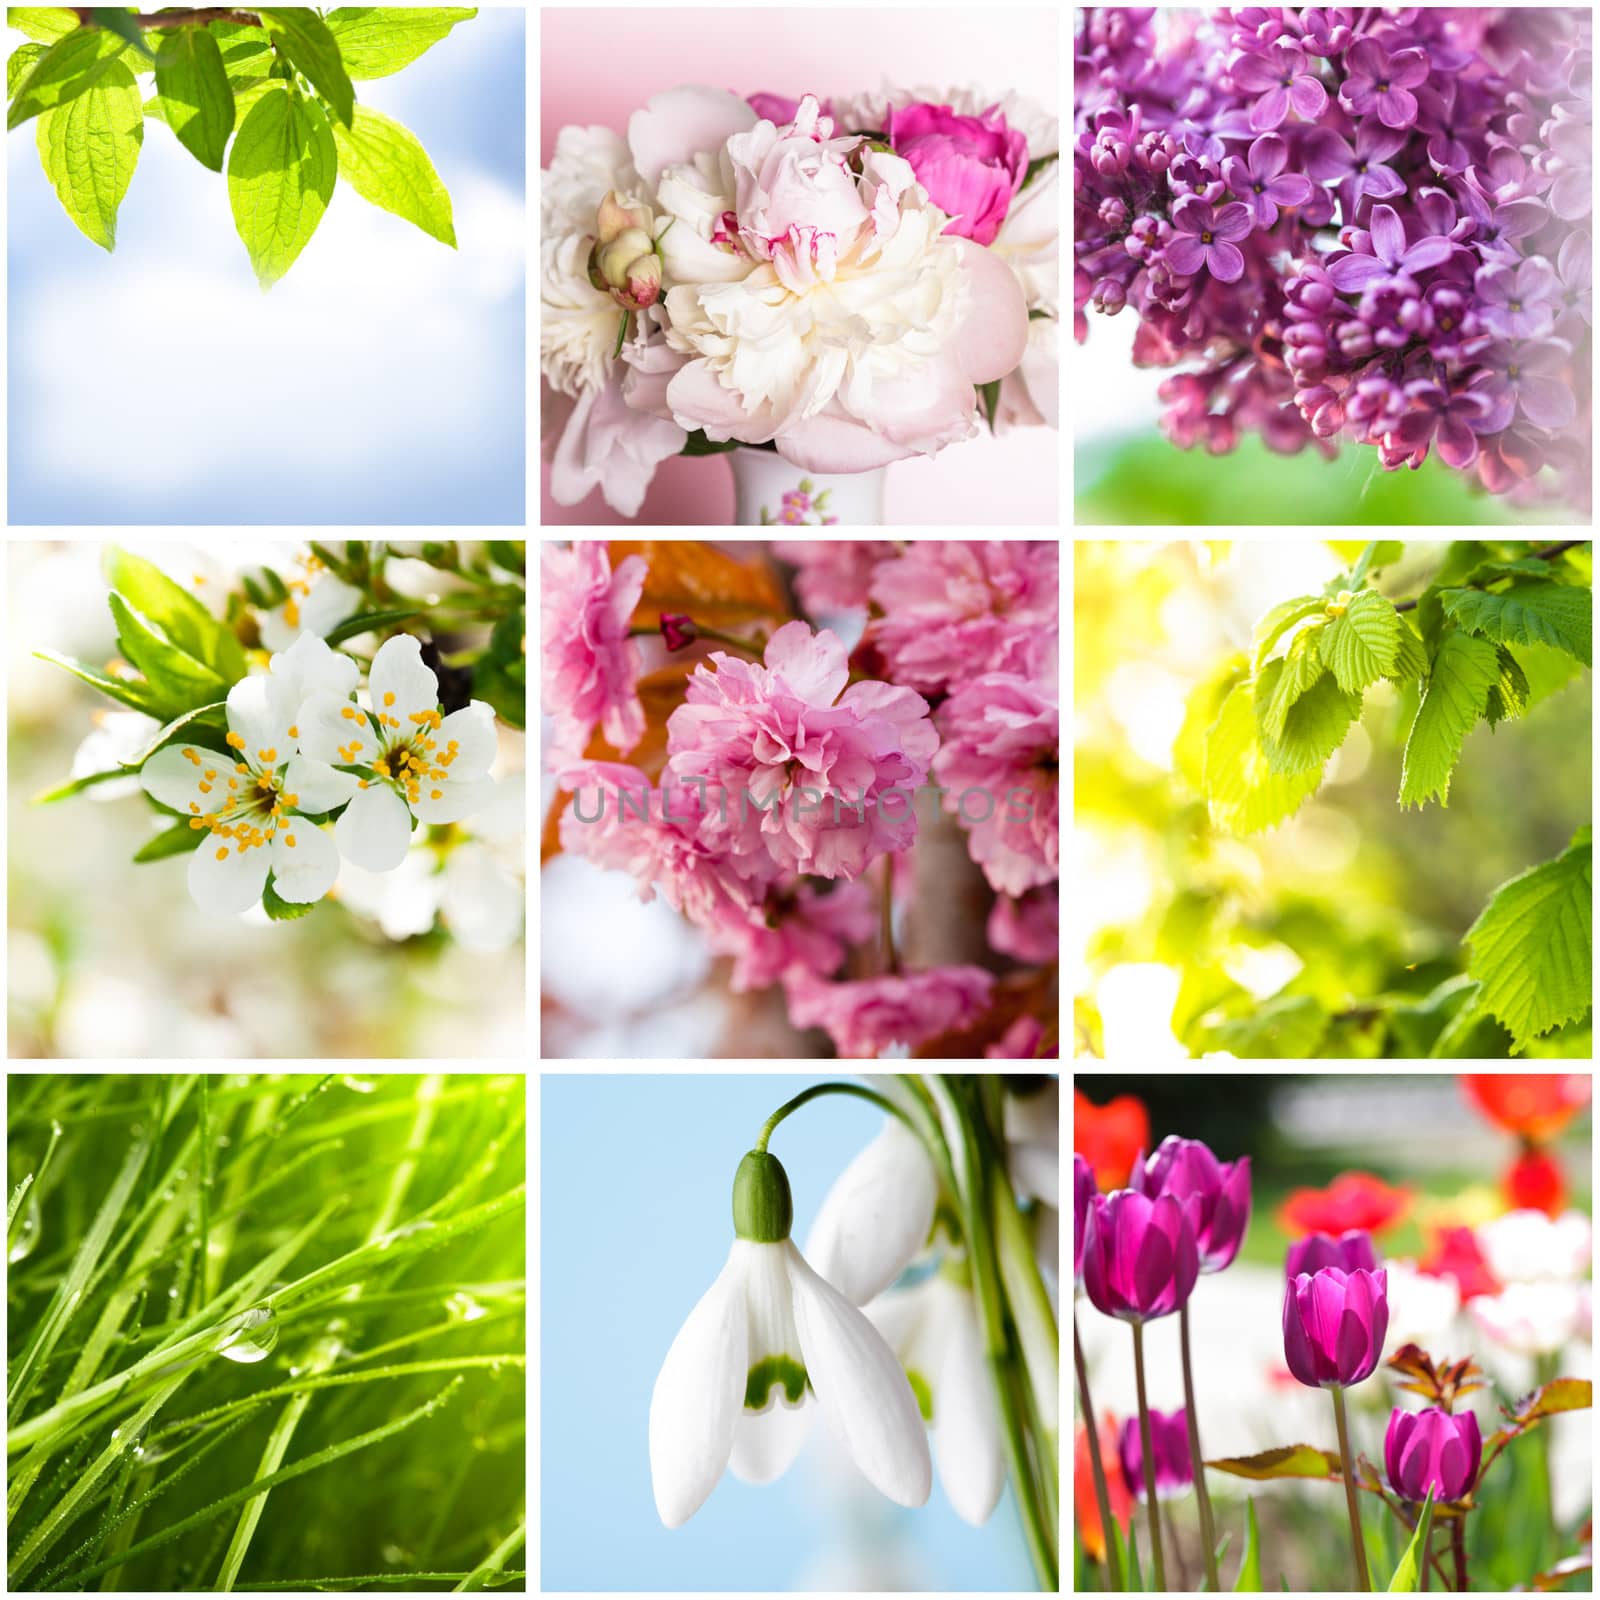 Springtime collage from nine photos of nature 